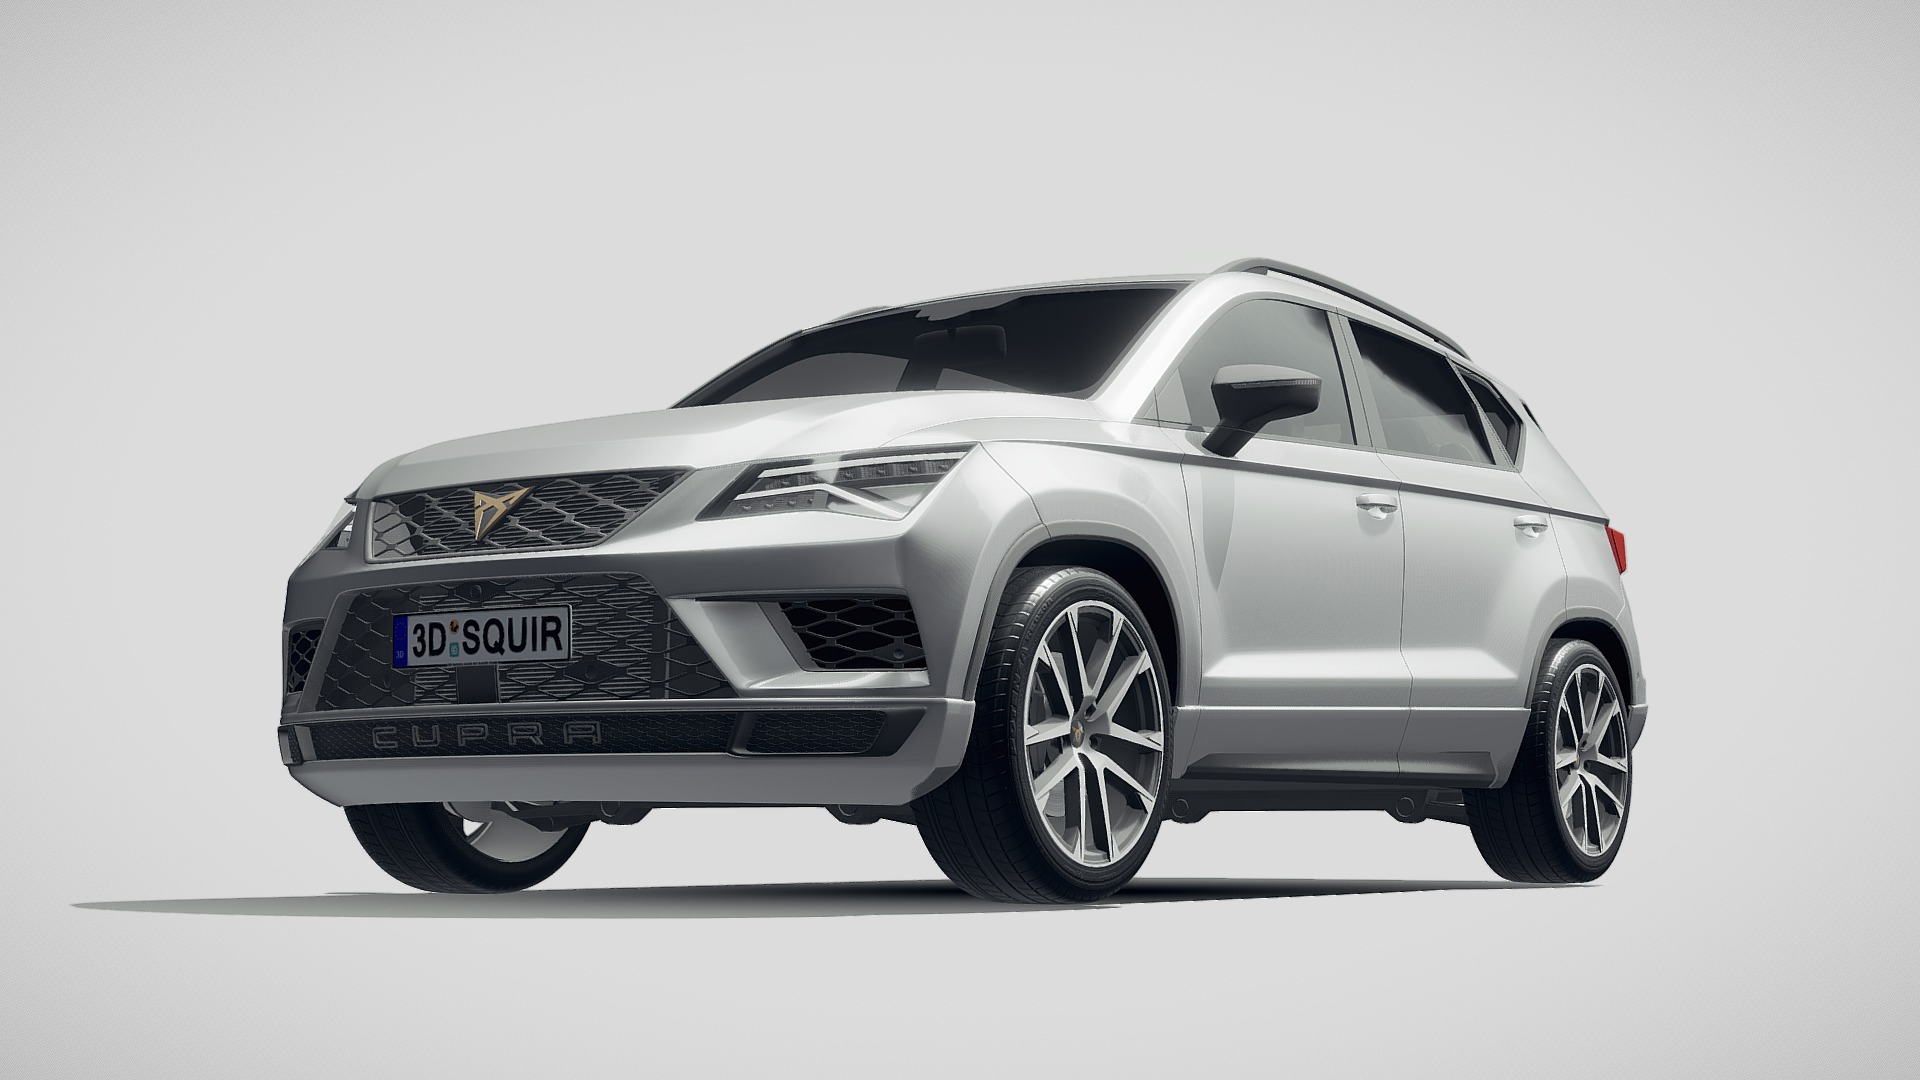 3D model Seat Ateca Cupra 2019 - This is a 3D model of the Seat Ateca Cupra 2019. The 3D model is about a silver car with a white background.